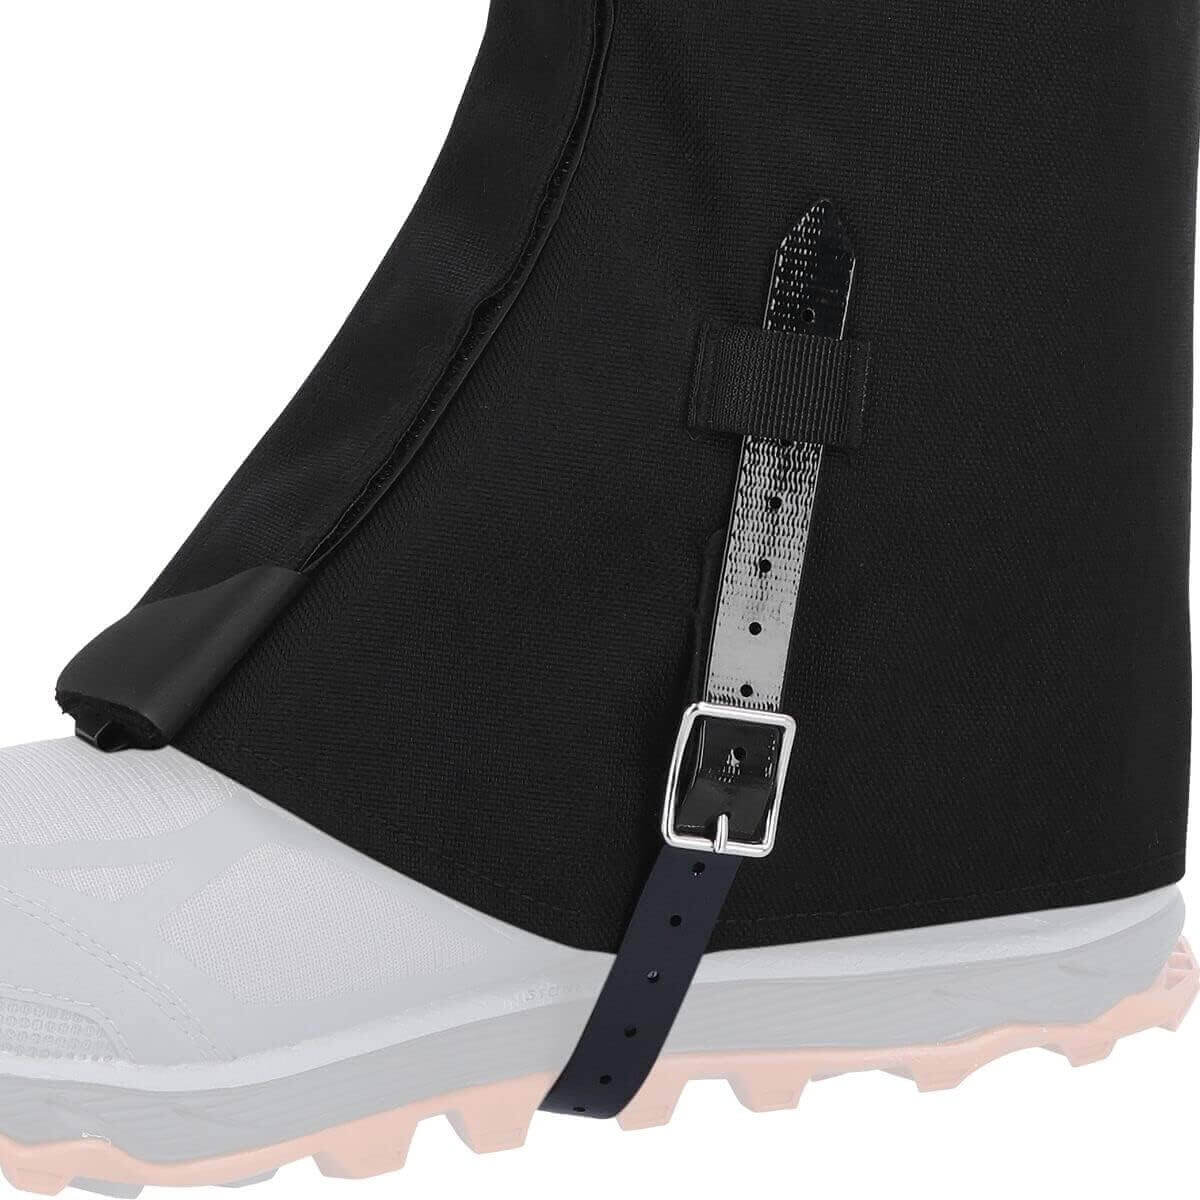 Shop The Latest >Outdoor Research Men's Rocky Mountain High Gaiters > *Only $68.53*> From The Top Brand > *Outdoor researchl* > Shop Now and Get Free Shipping On Orders Over $45.00 >*Shop Earth Foot*